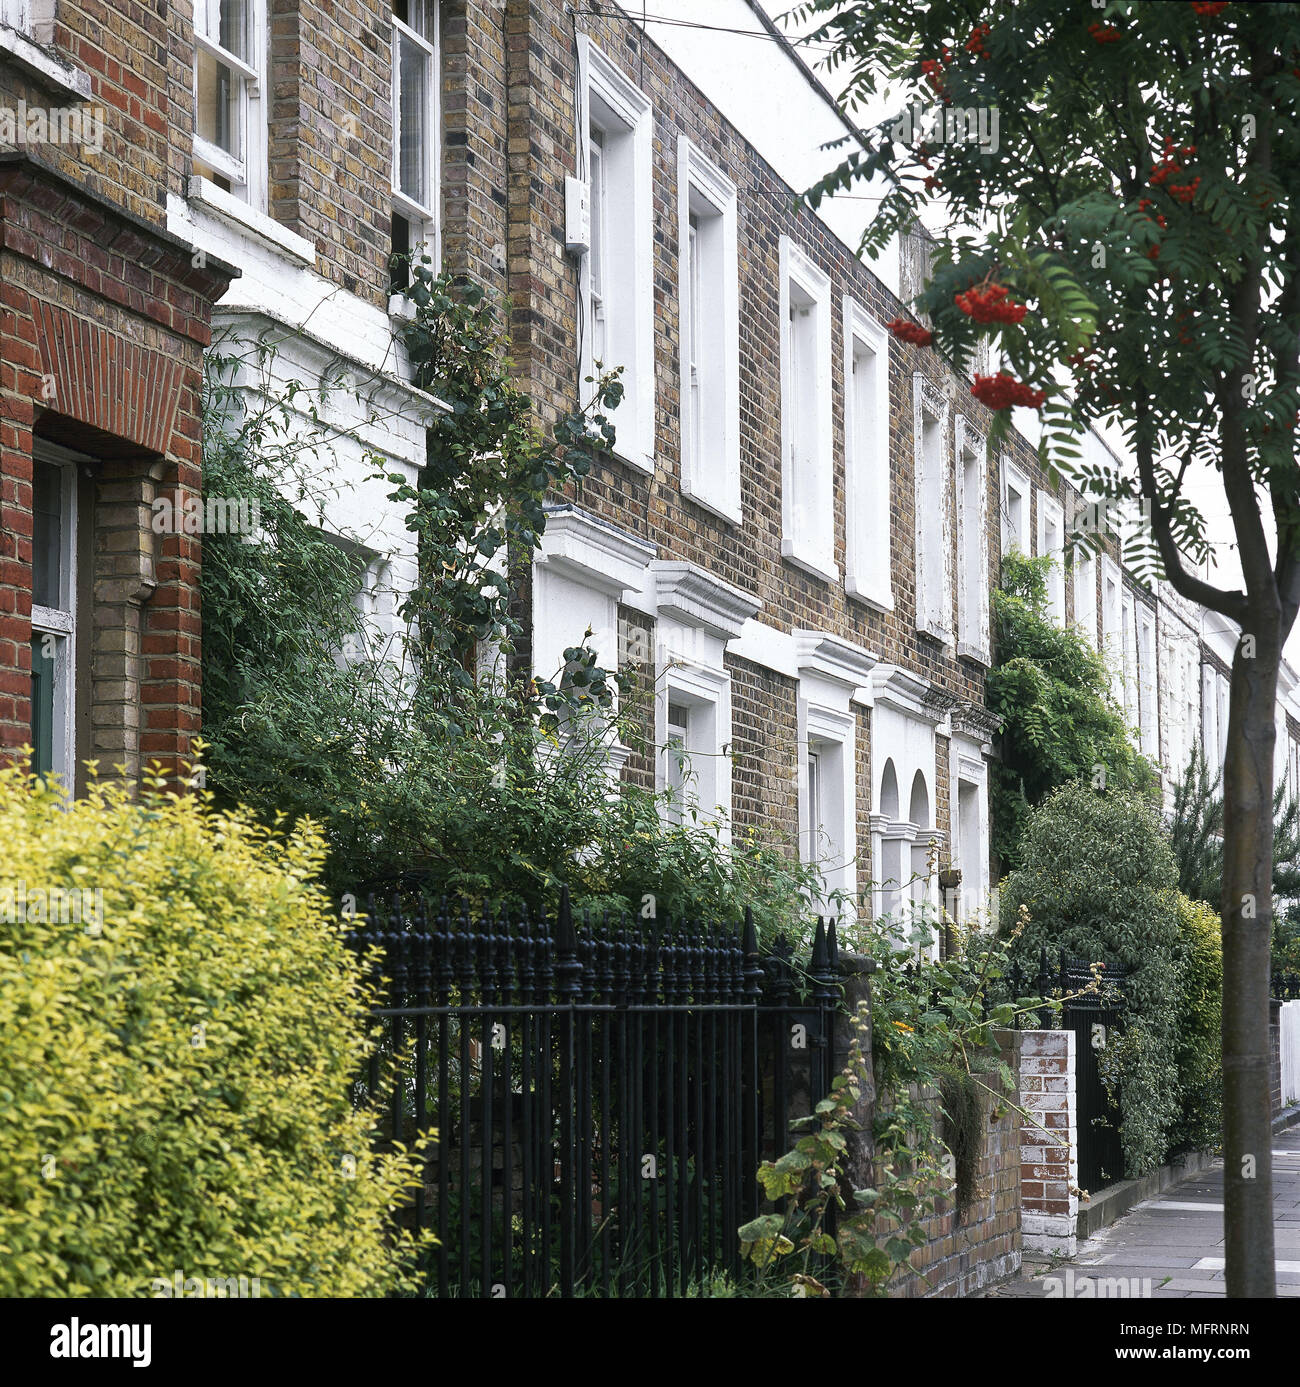 Exterior of Victorian, red brick terraced town houses, Stock Photo